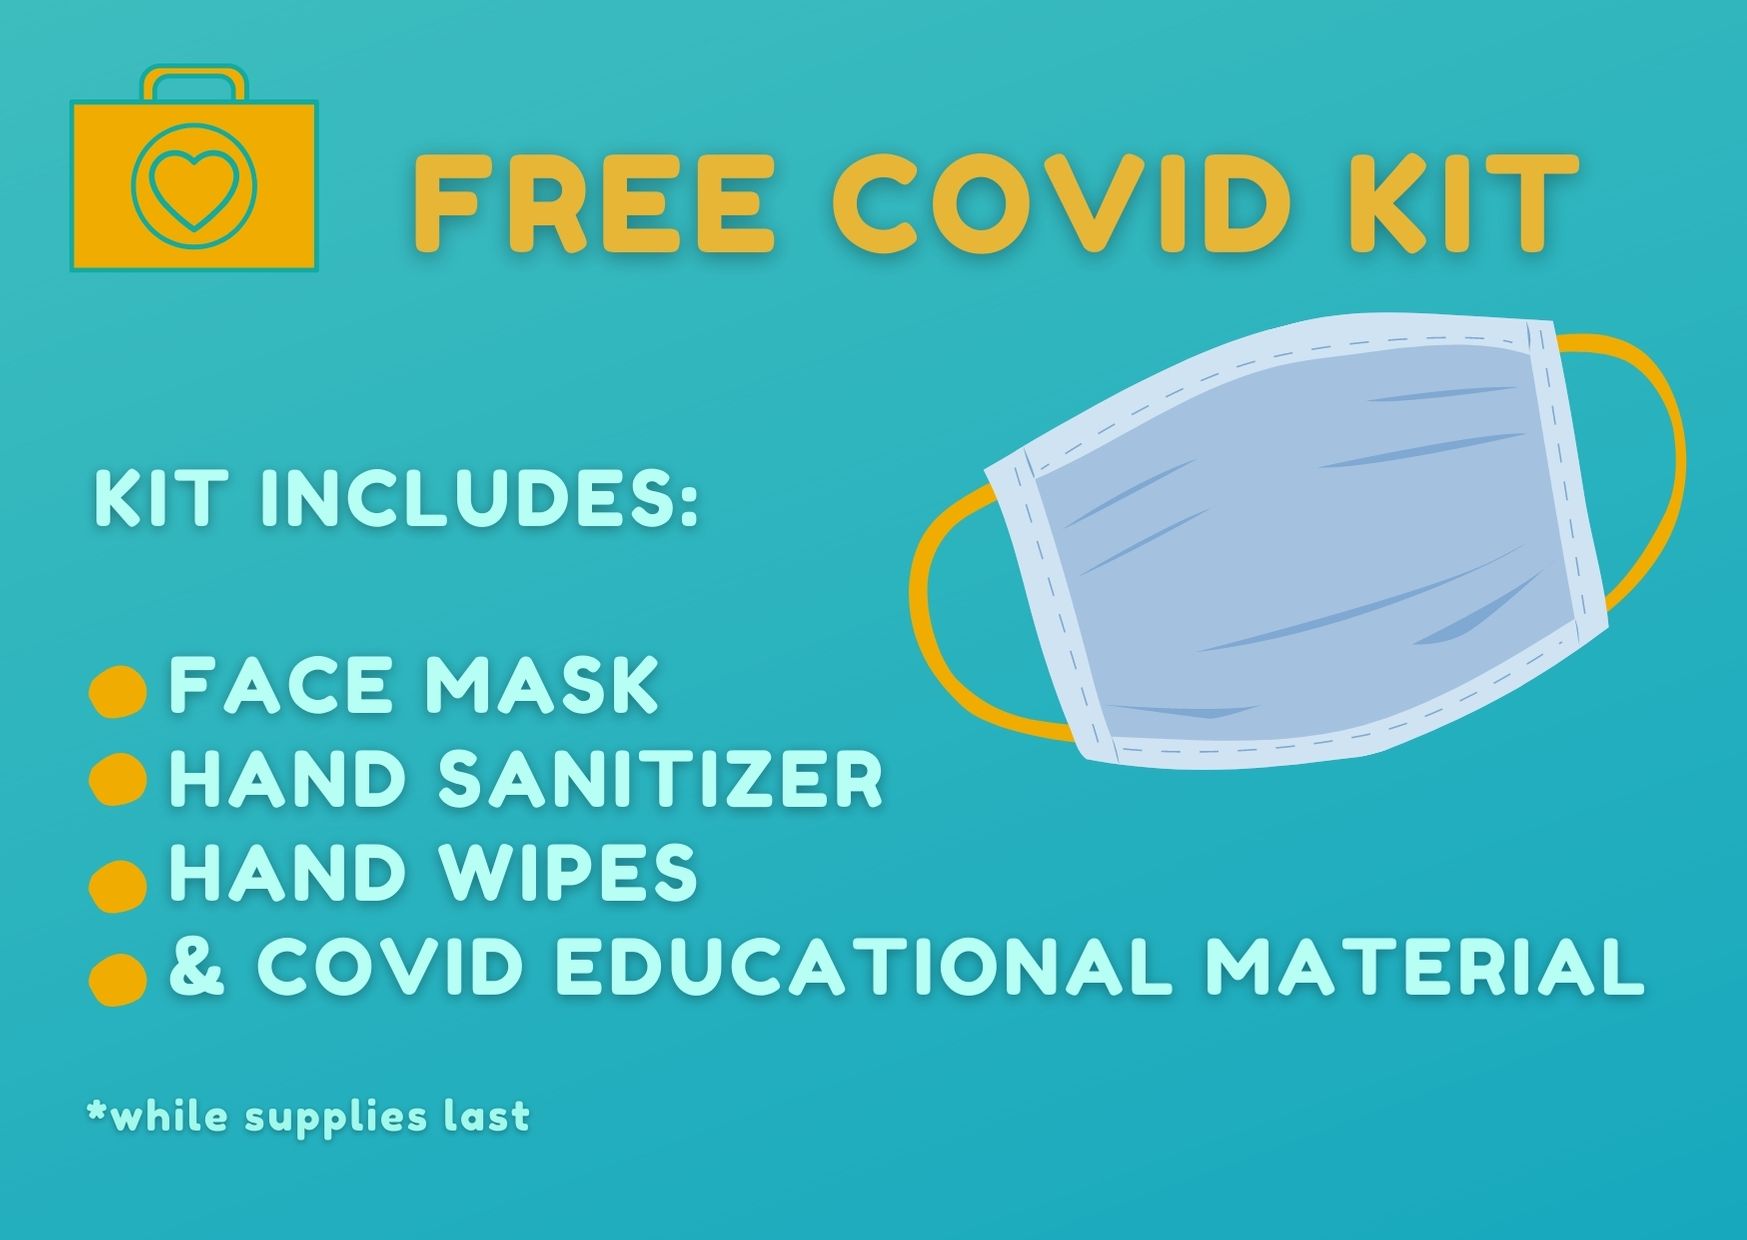 COVID KIT -updated 10.14.2020